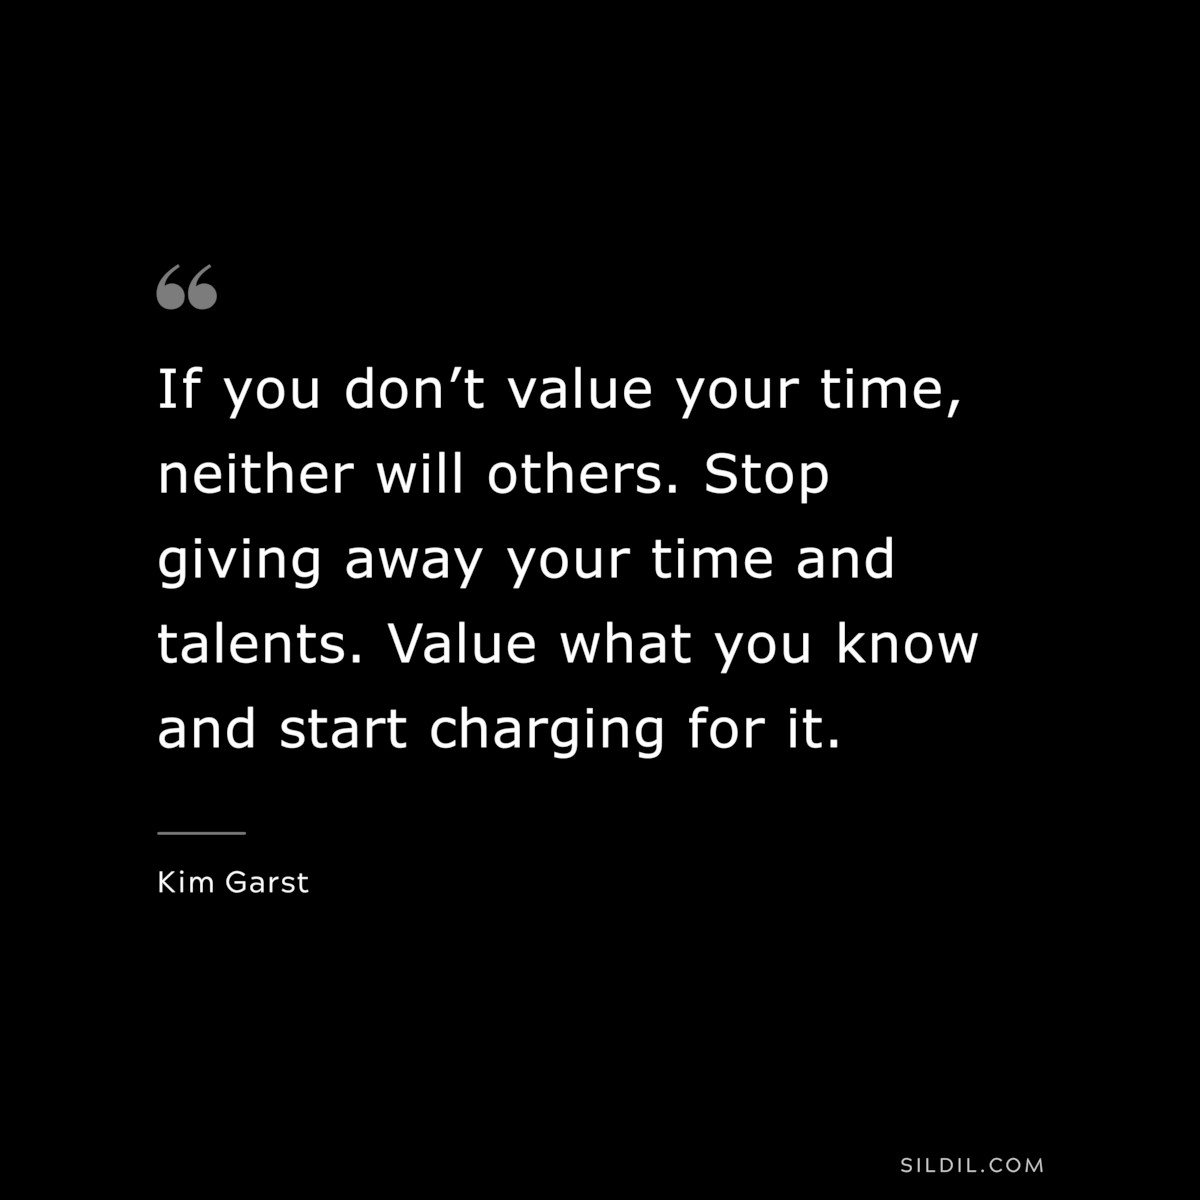 If you don’t value your time, neither will others. Stop giving away your time and talents. Value what you know and start charging for it. ― Kim Garst